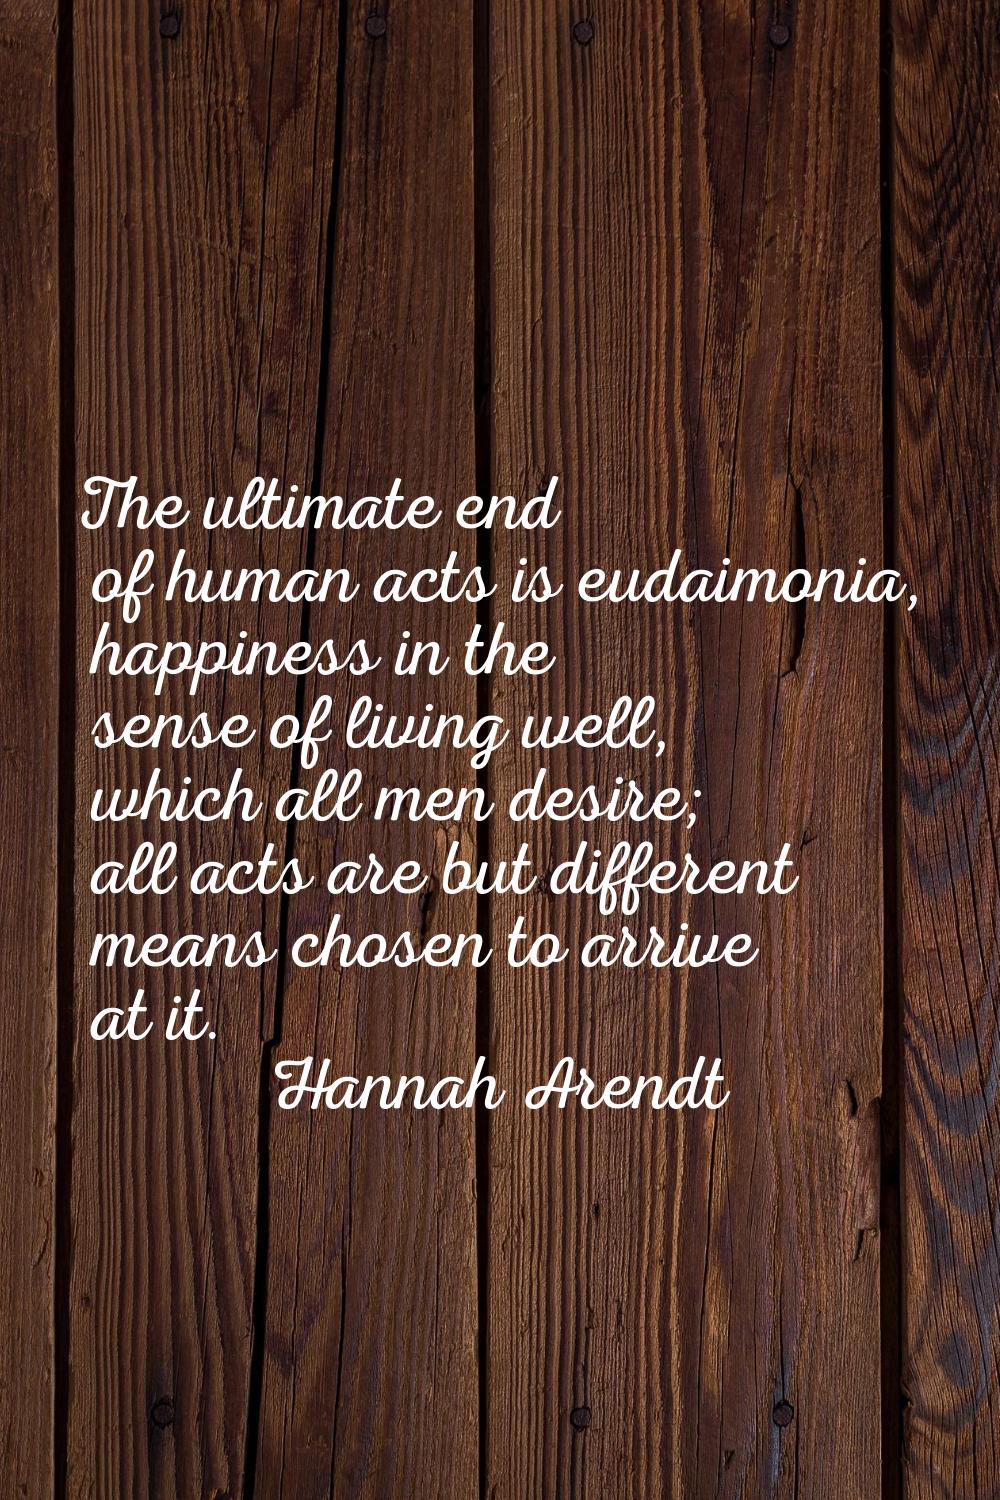 The ultimate end of human acts is eudaimonia, happiness in the sense of living well, which all men 